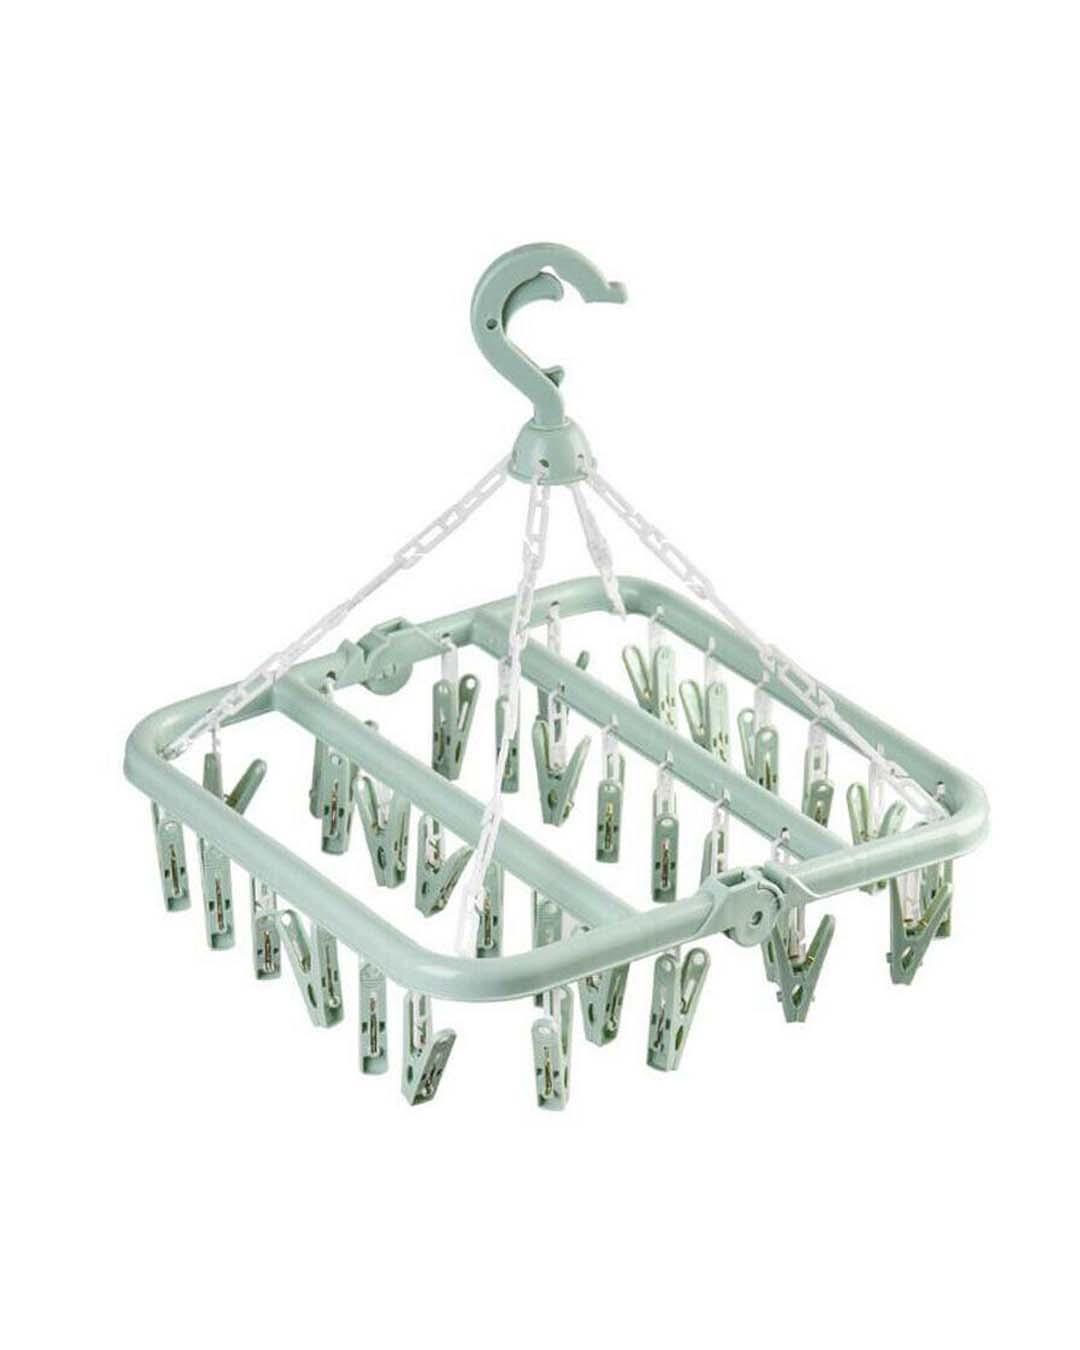 Clothes Hanger with In-Built Pegs, Green, Plastic - MARKET 99